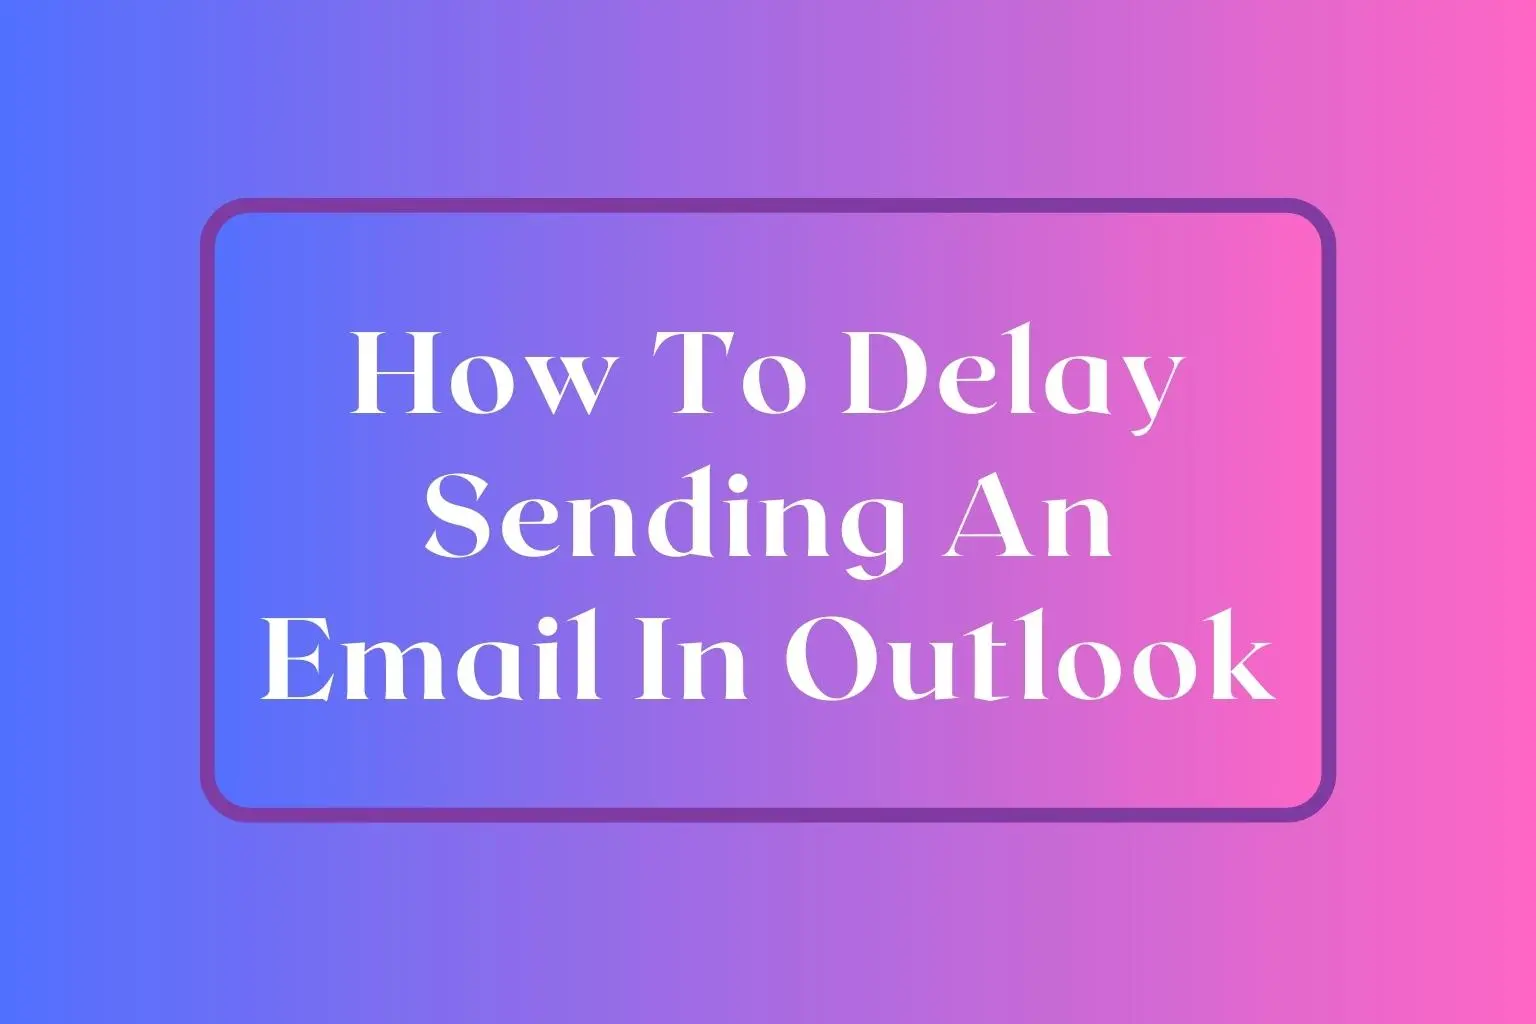 How To Delay Sending An Email In Outlook